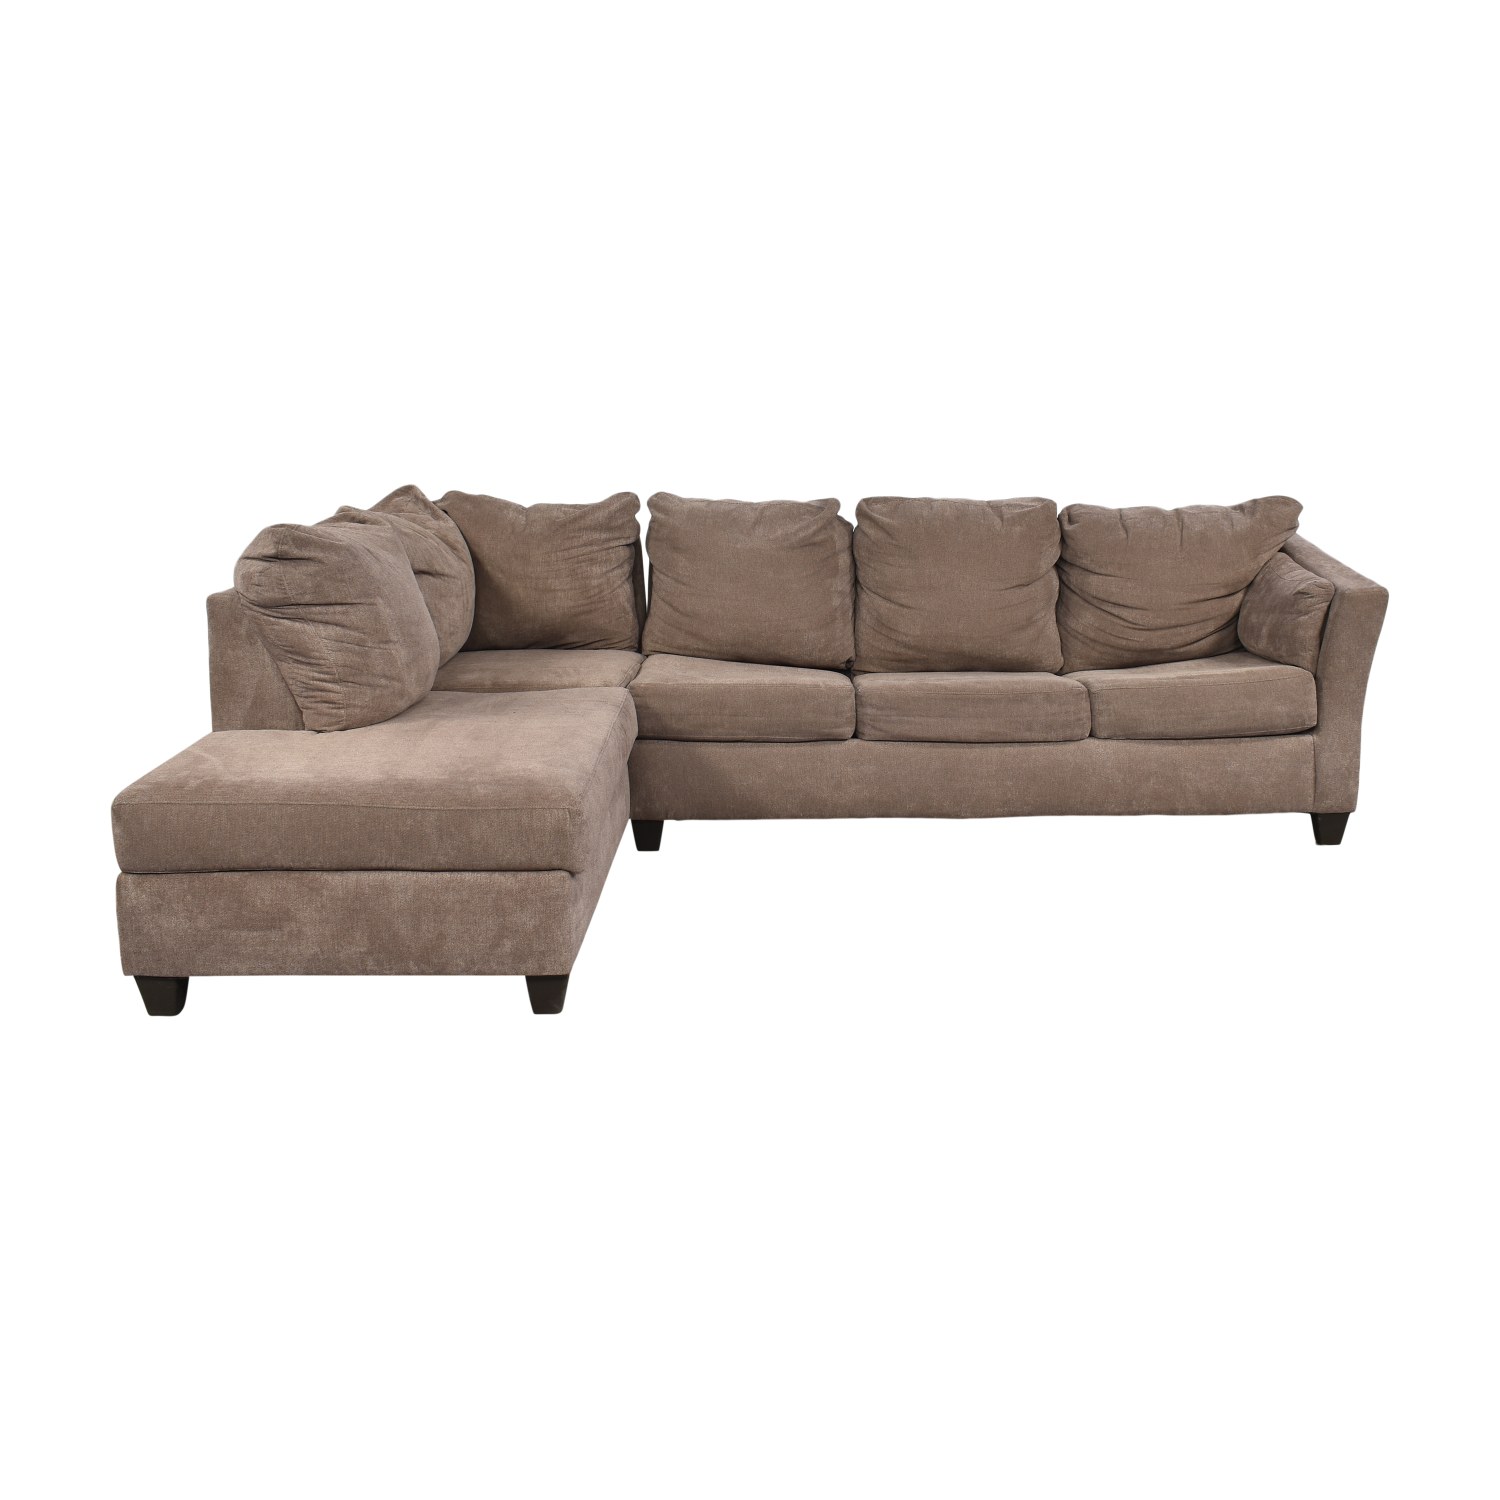 Bob's Discount Furniture Virgo Two Piece Chaise Sleeper Sectional 